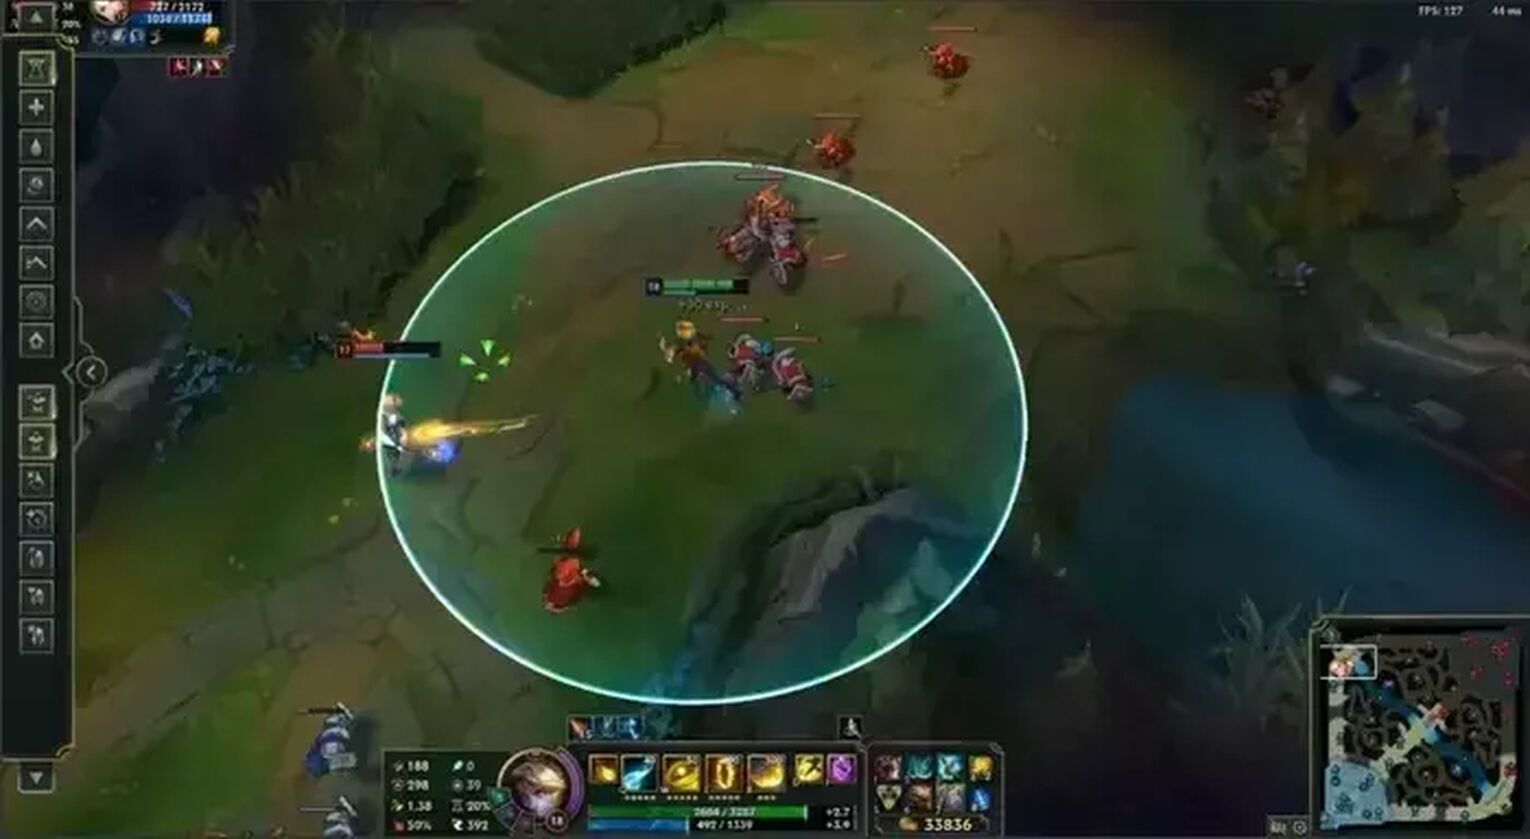 How to Kite (Attack Move) in League of Legends? - LeagueFeed